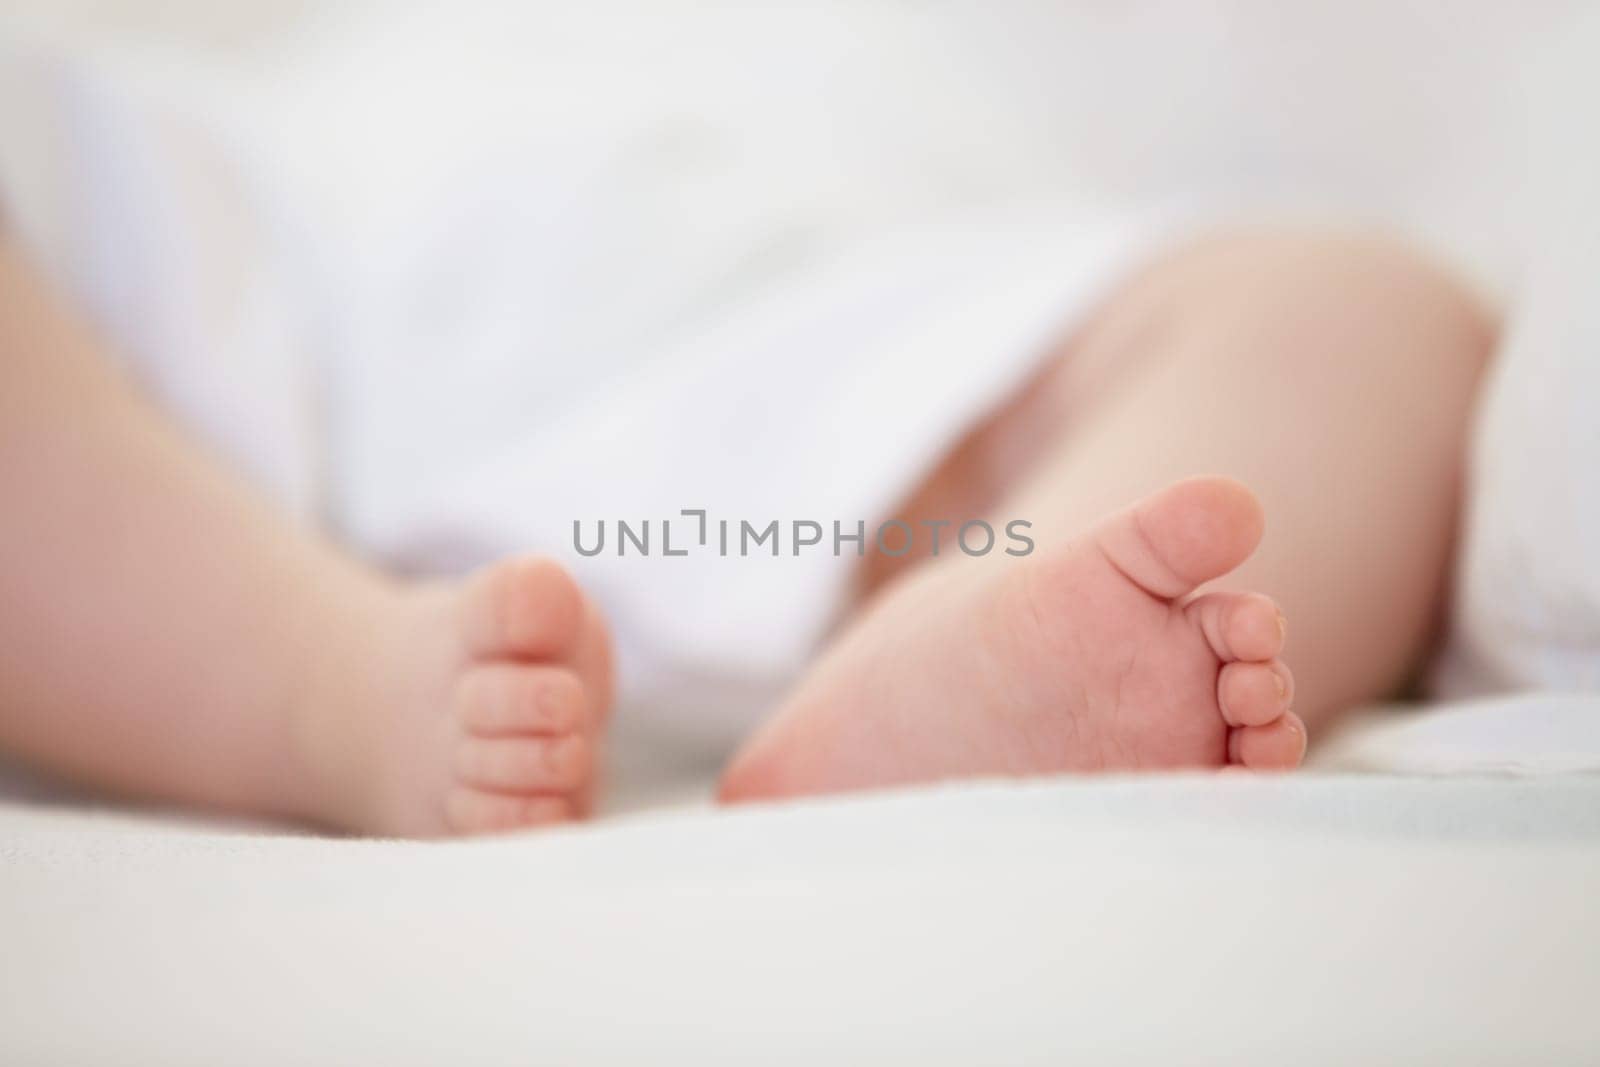 Sleeping, bed and feet of baby in home for dreaming, resting and nap for child development. Family, nursery and closeup of toes of newborn infant in bedroom relax for wellness, health and growth by YuriArcurs